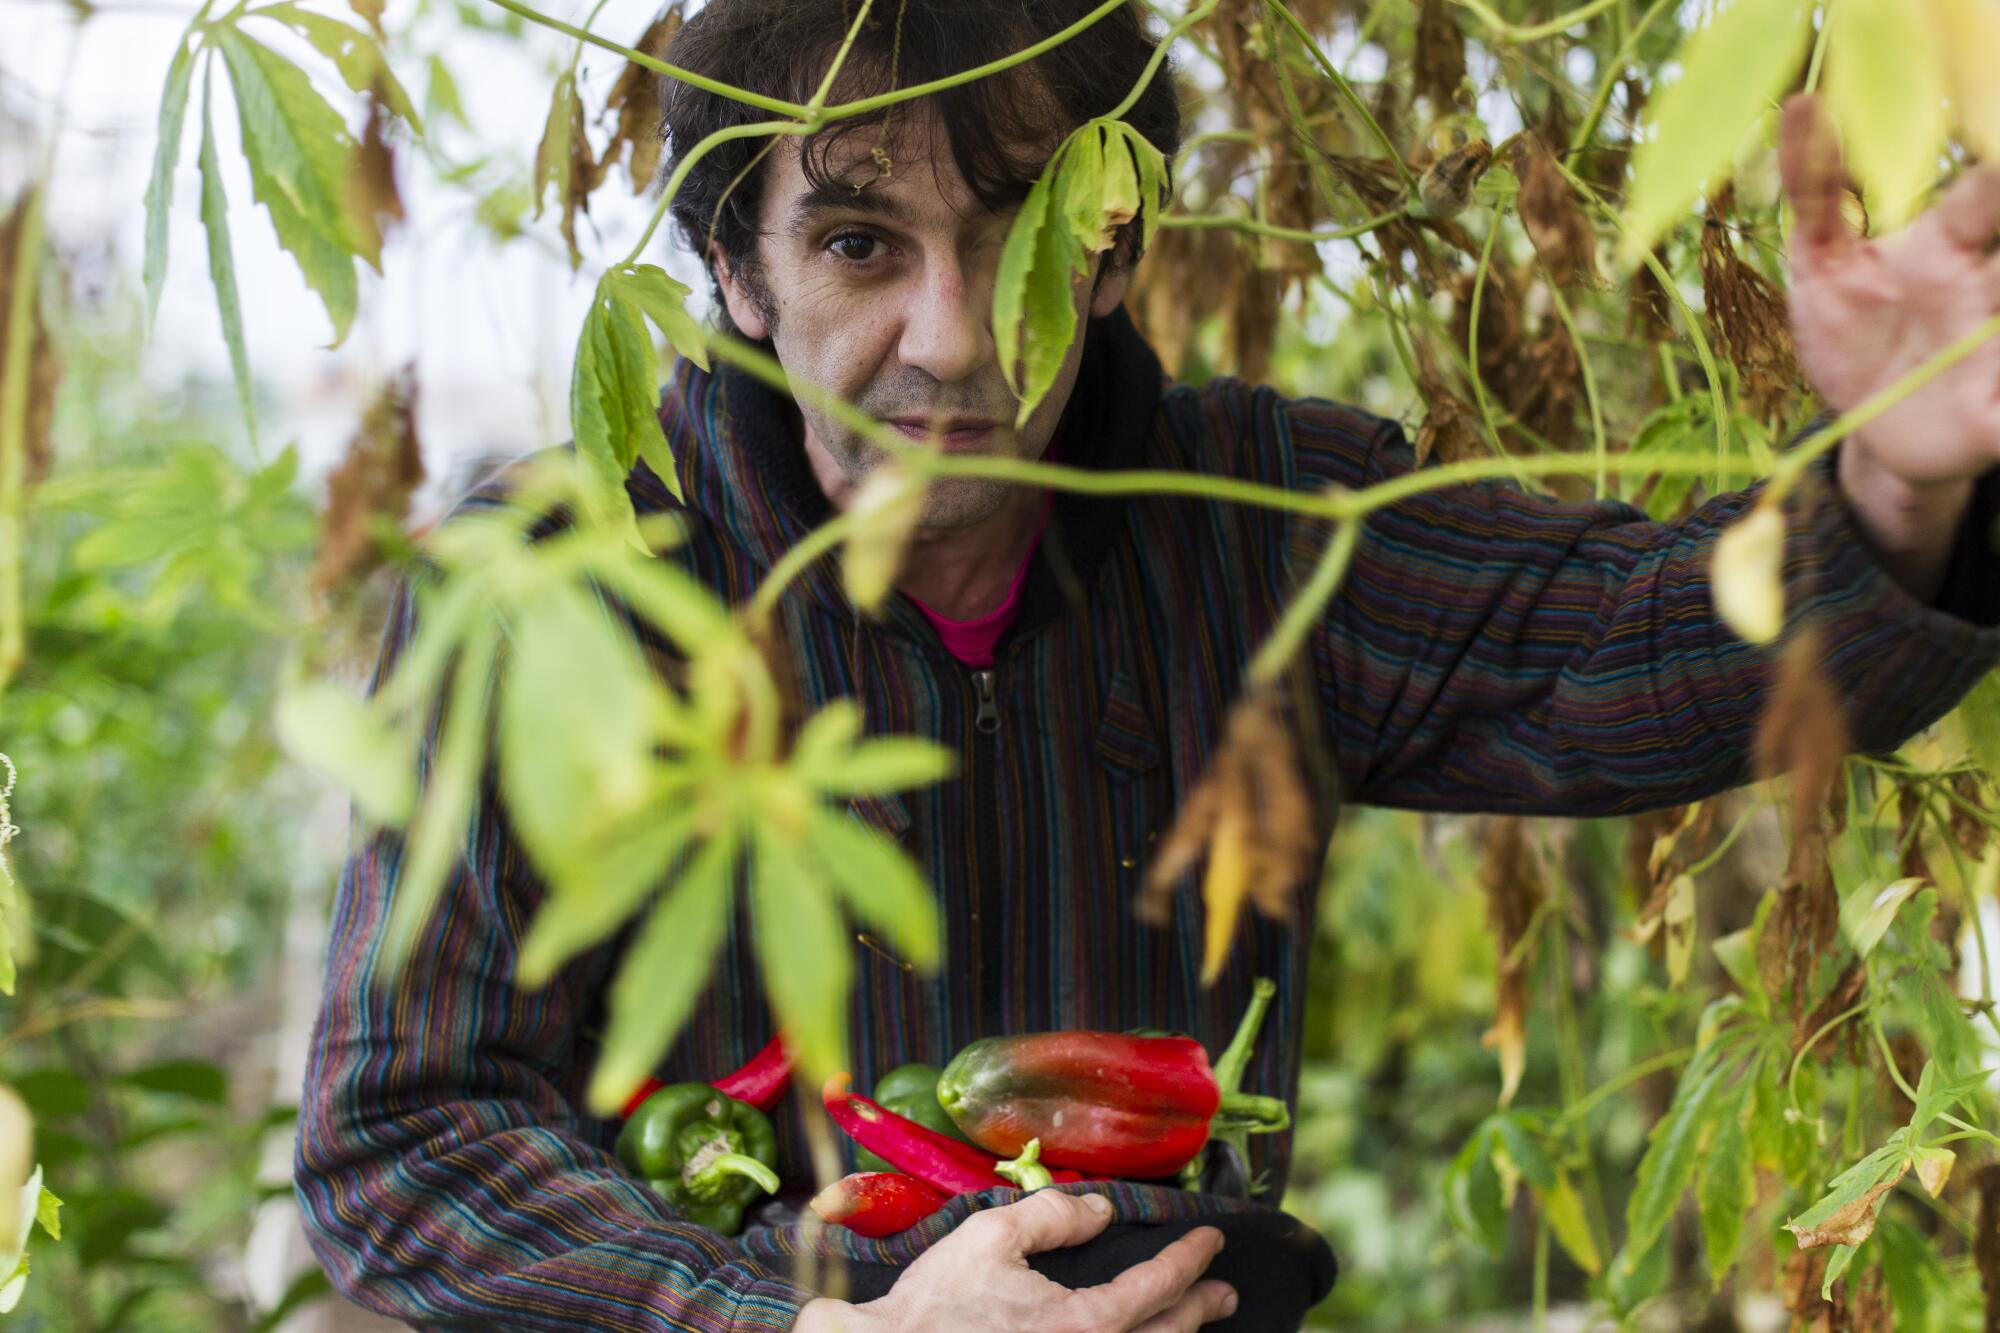 David López, one of theWorld Family founders, collecting peppers in the community's greenhouse